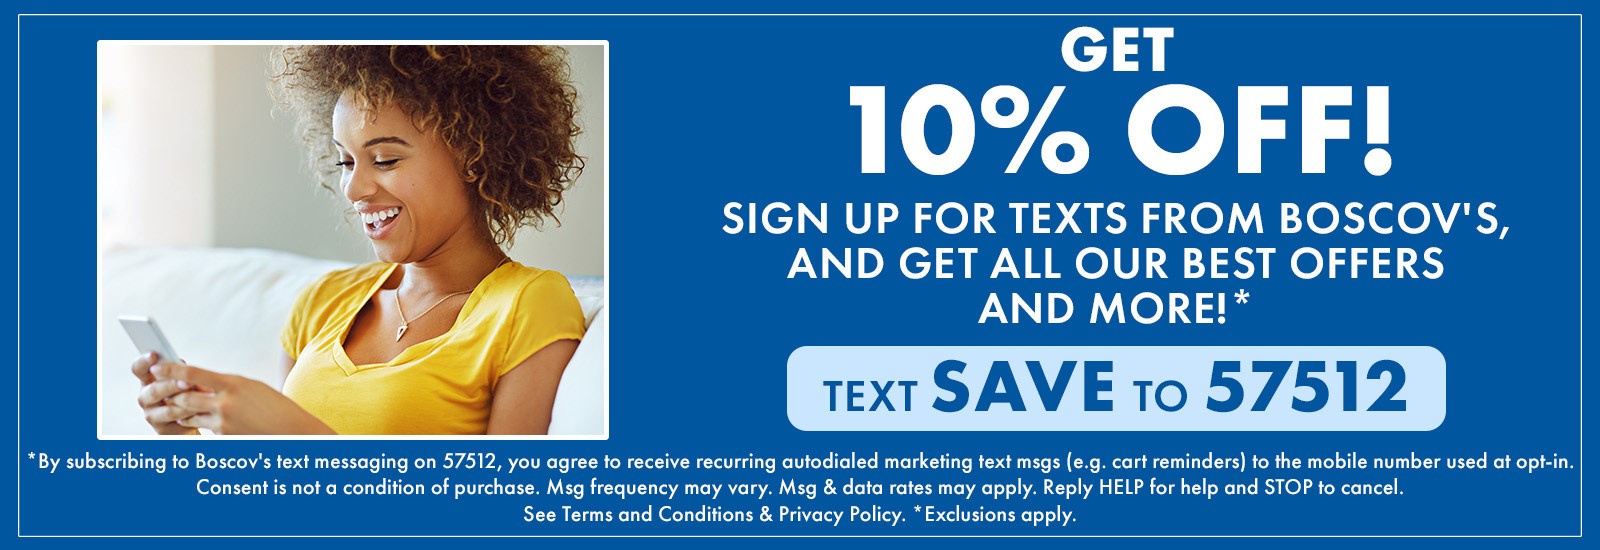 Get 10% off! Sign up for texts from Boscov's and get all our best offers and more!